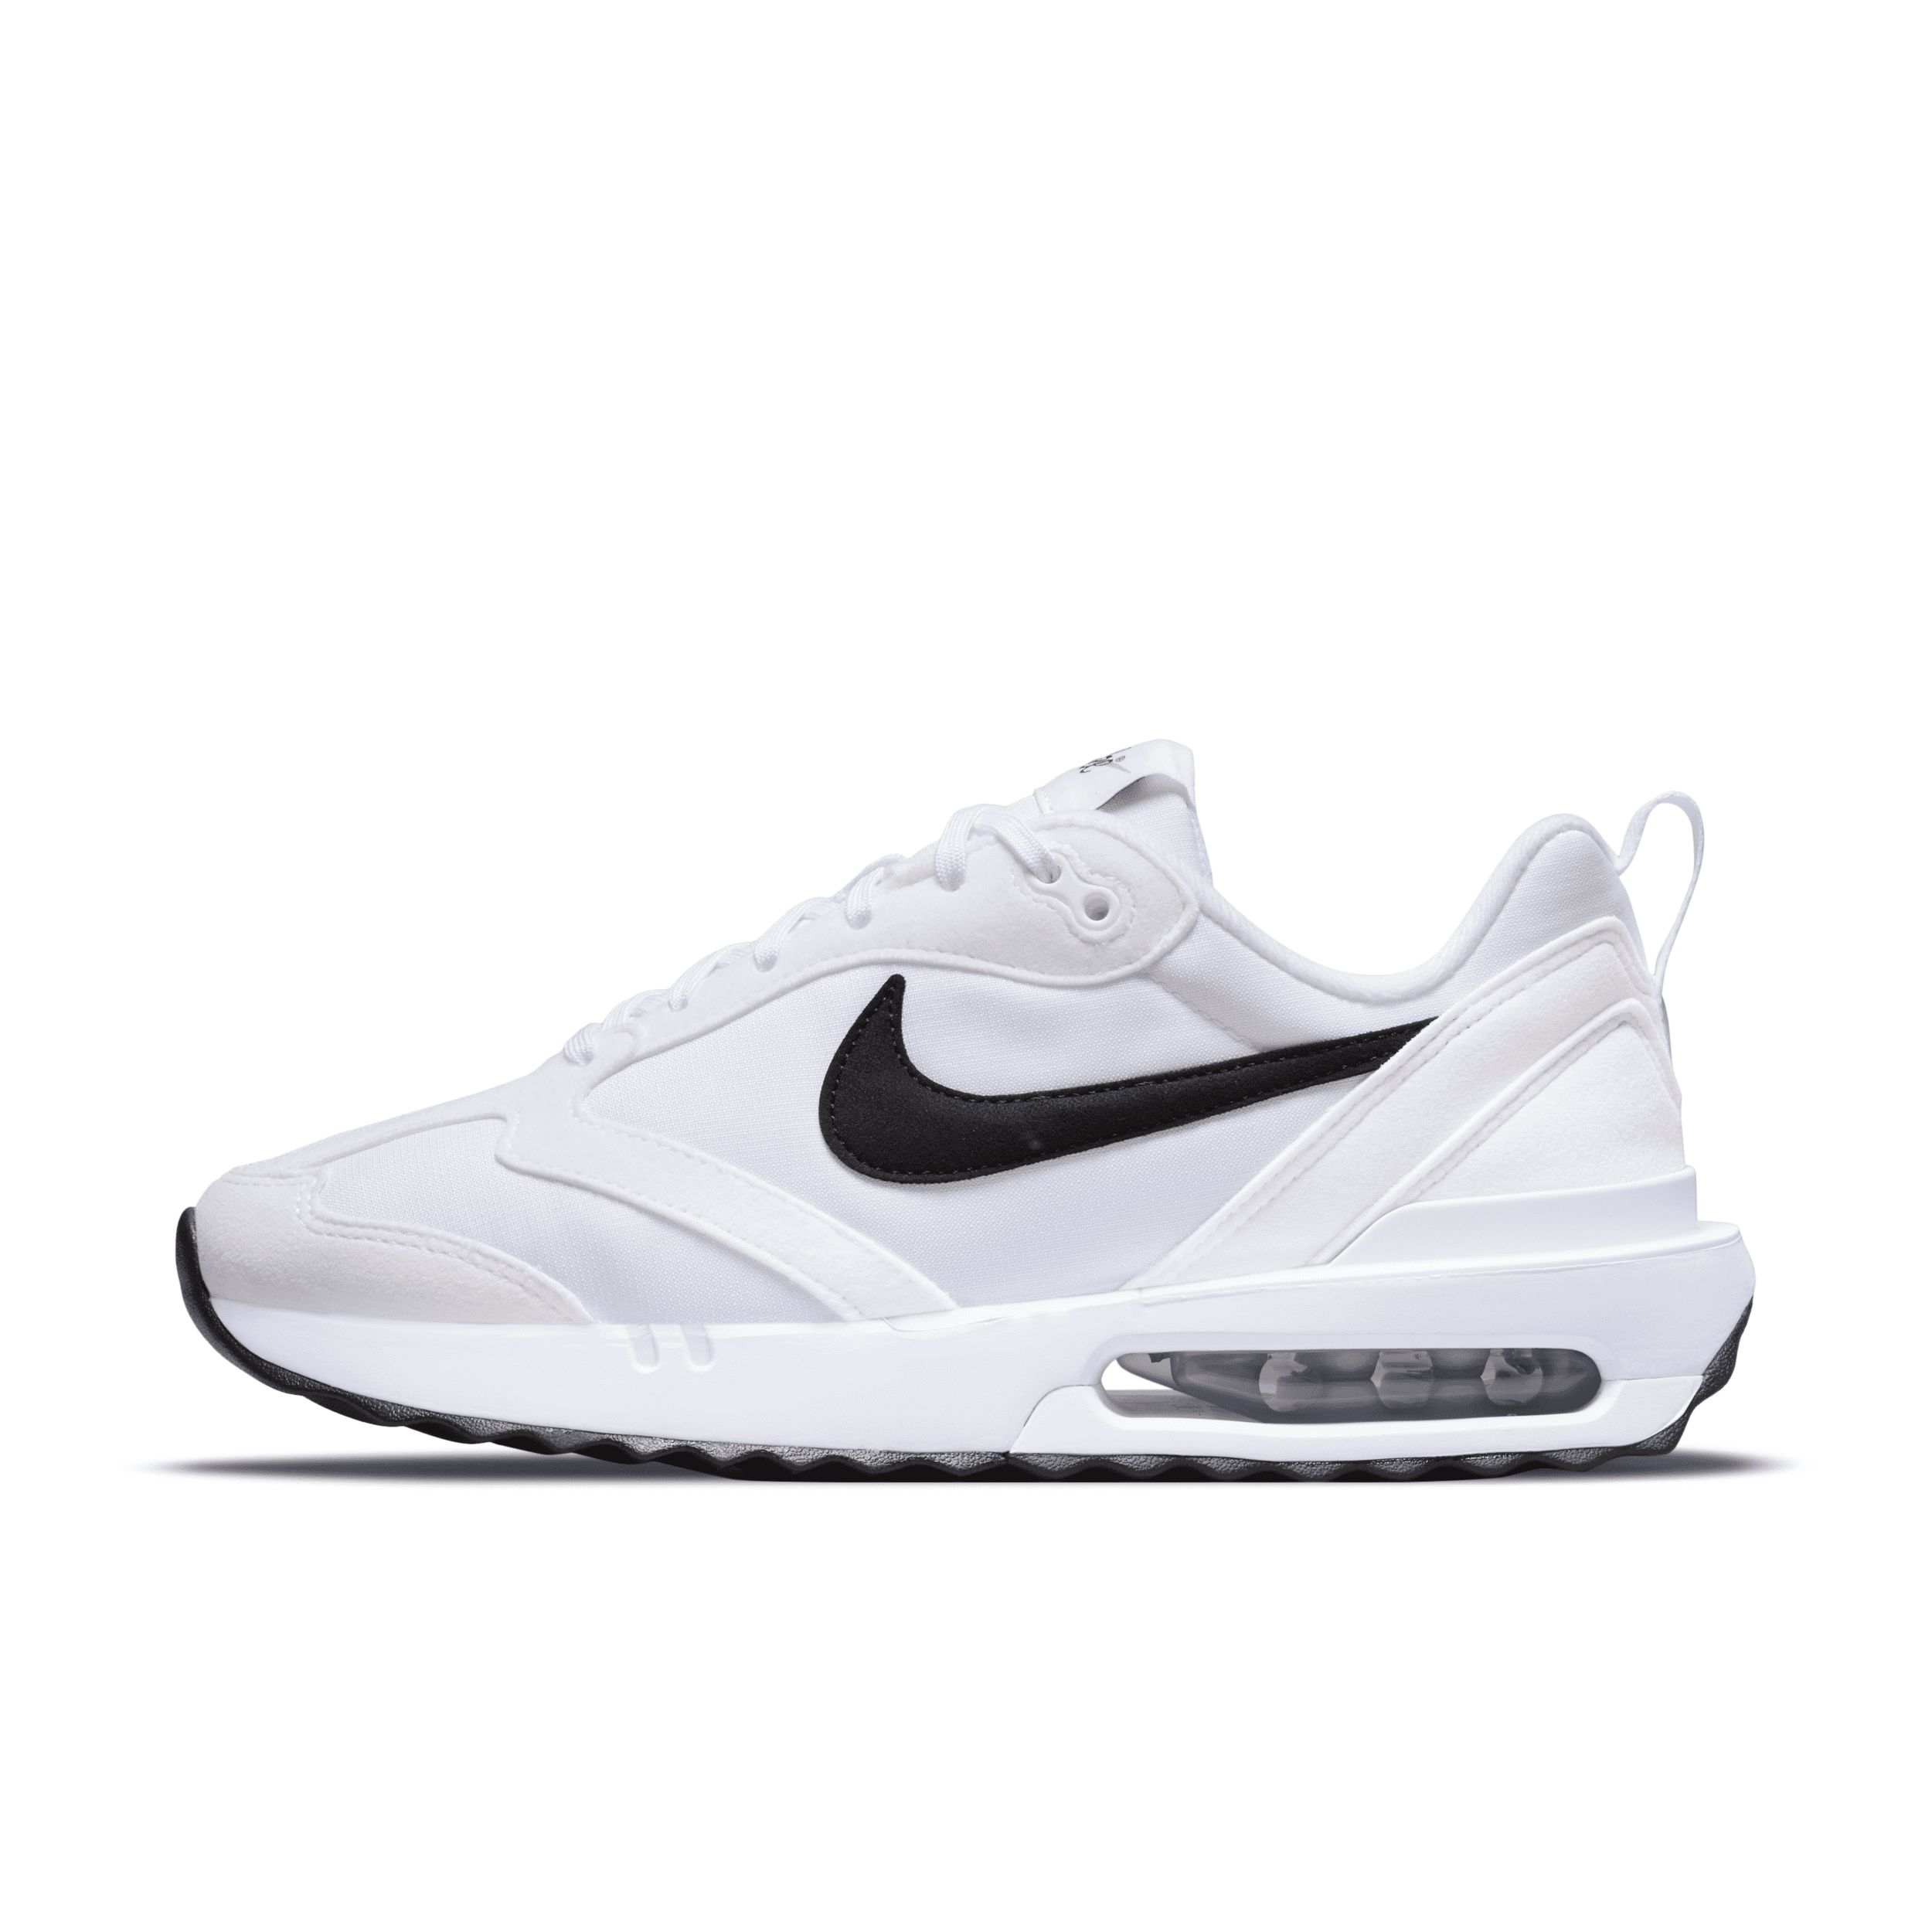 Nike Women's Air Max Dawn Shoes in White, Size: 6.5 | DH5131-101 | Nike (US)